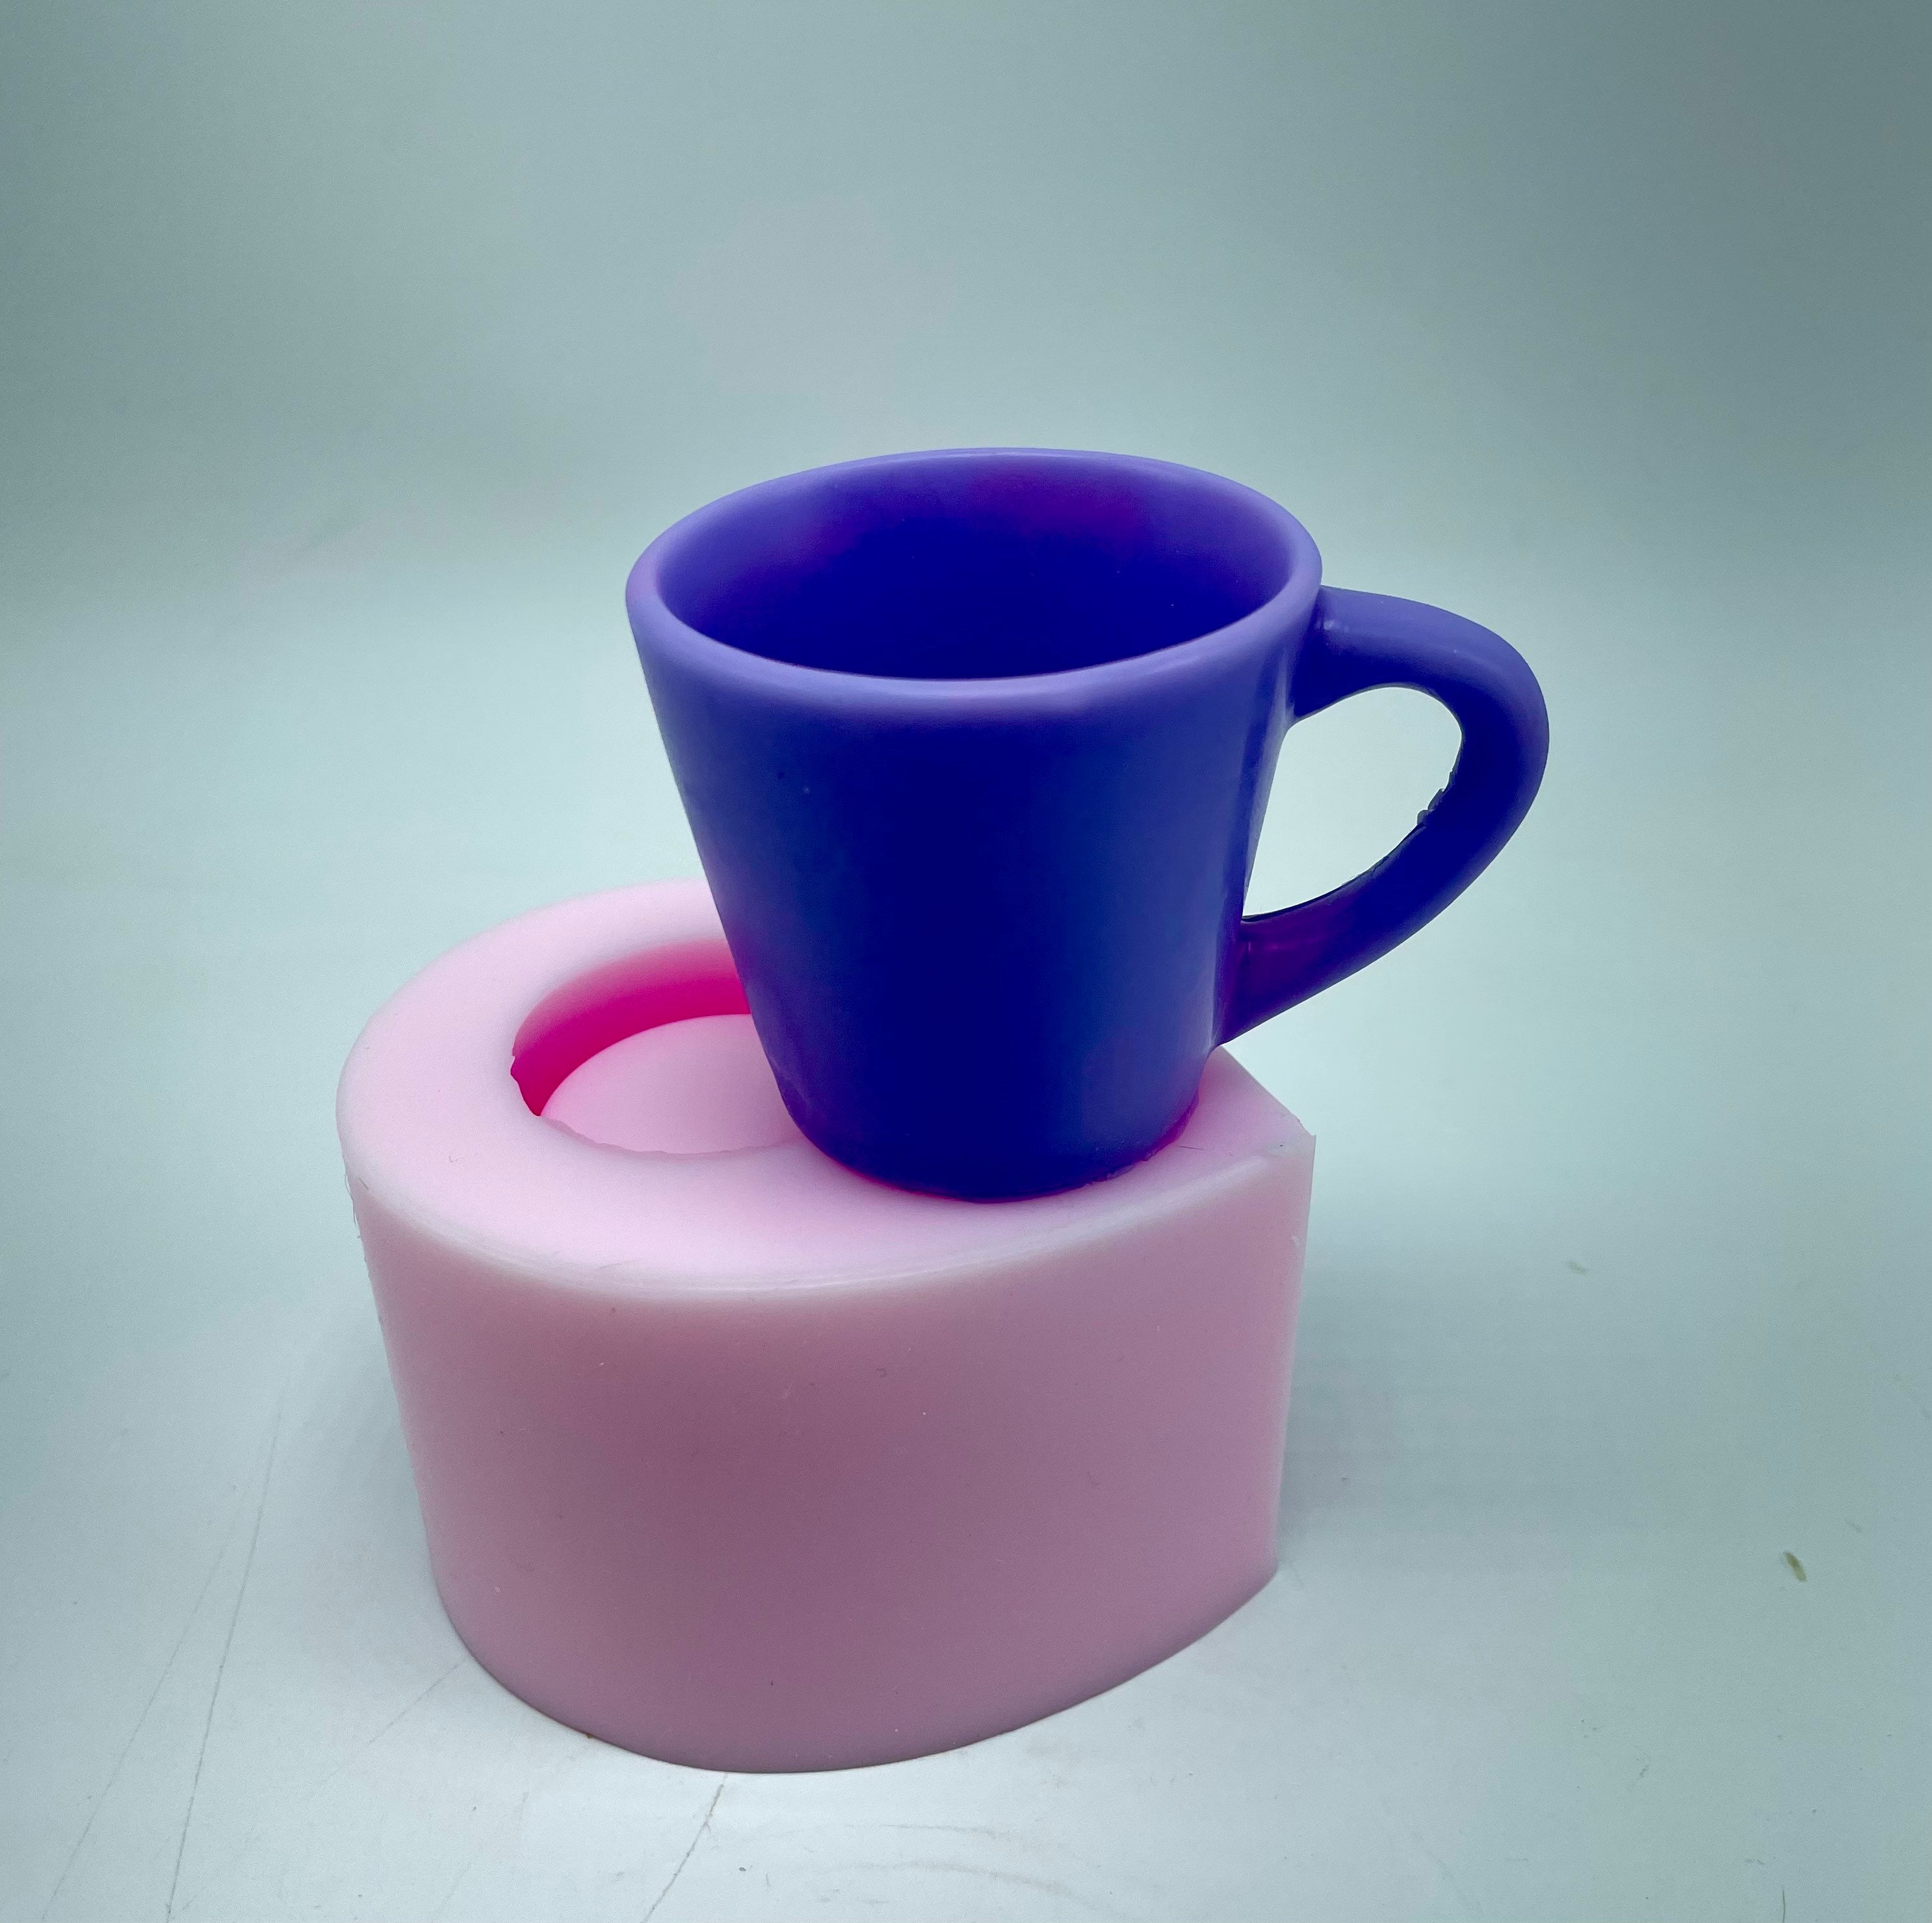 Coffee Mug Mold. Small Tea Cup Mold. Hot Chocolate Cup Craft Silicone Mold  for Soap, Epoxy, Etc 